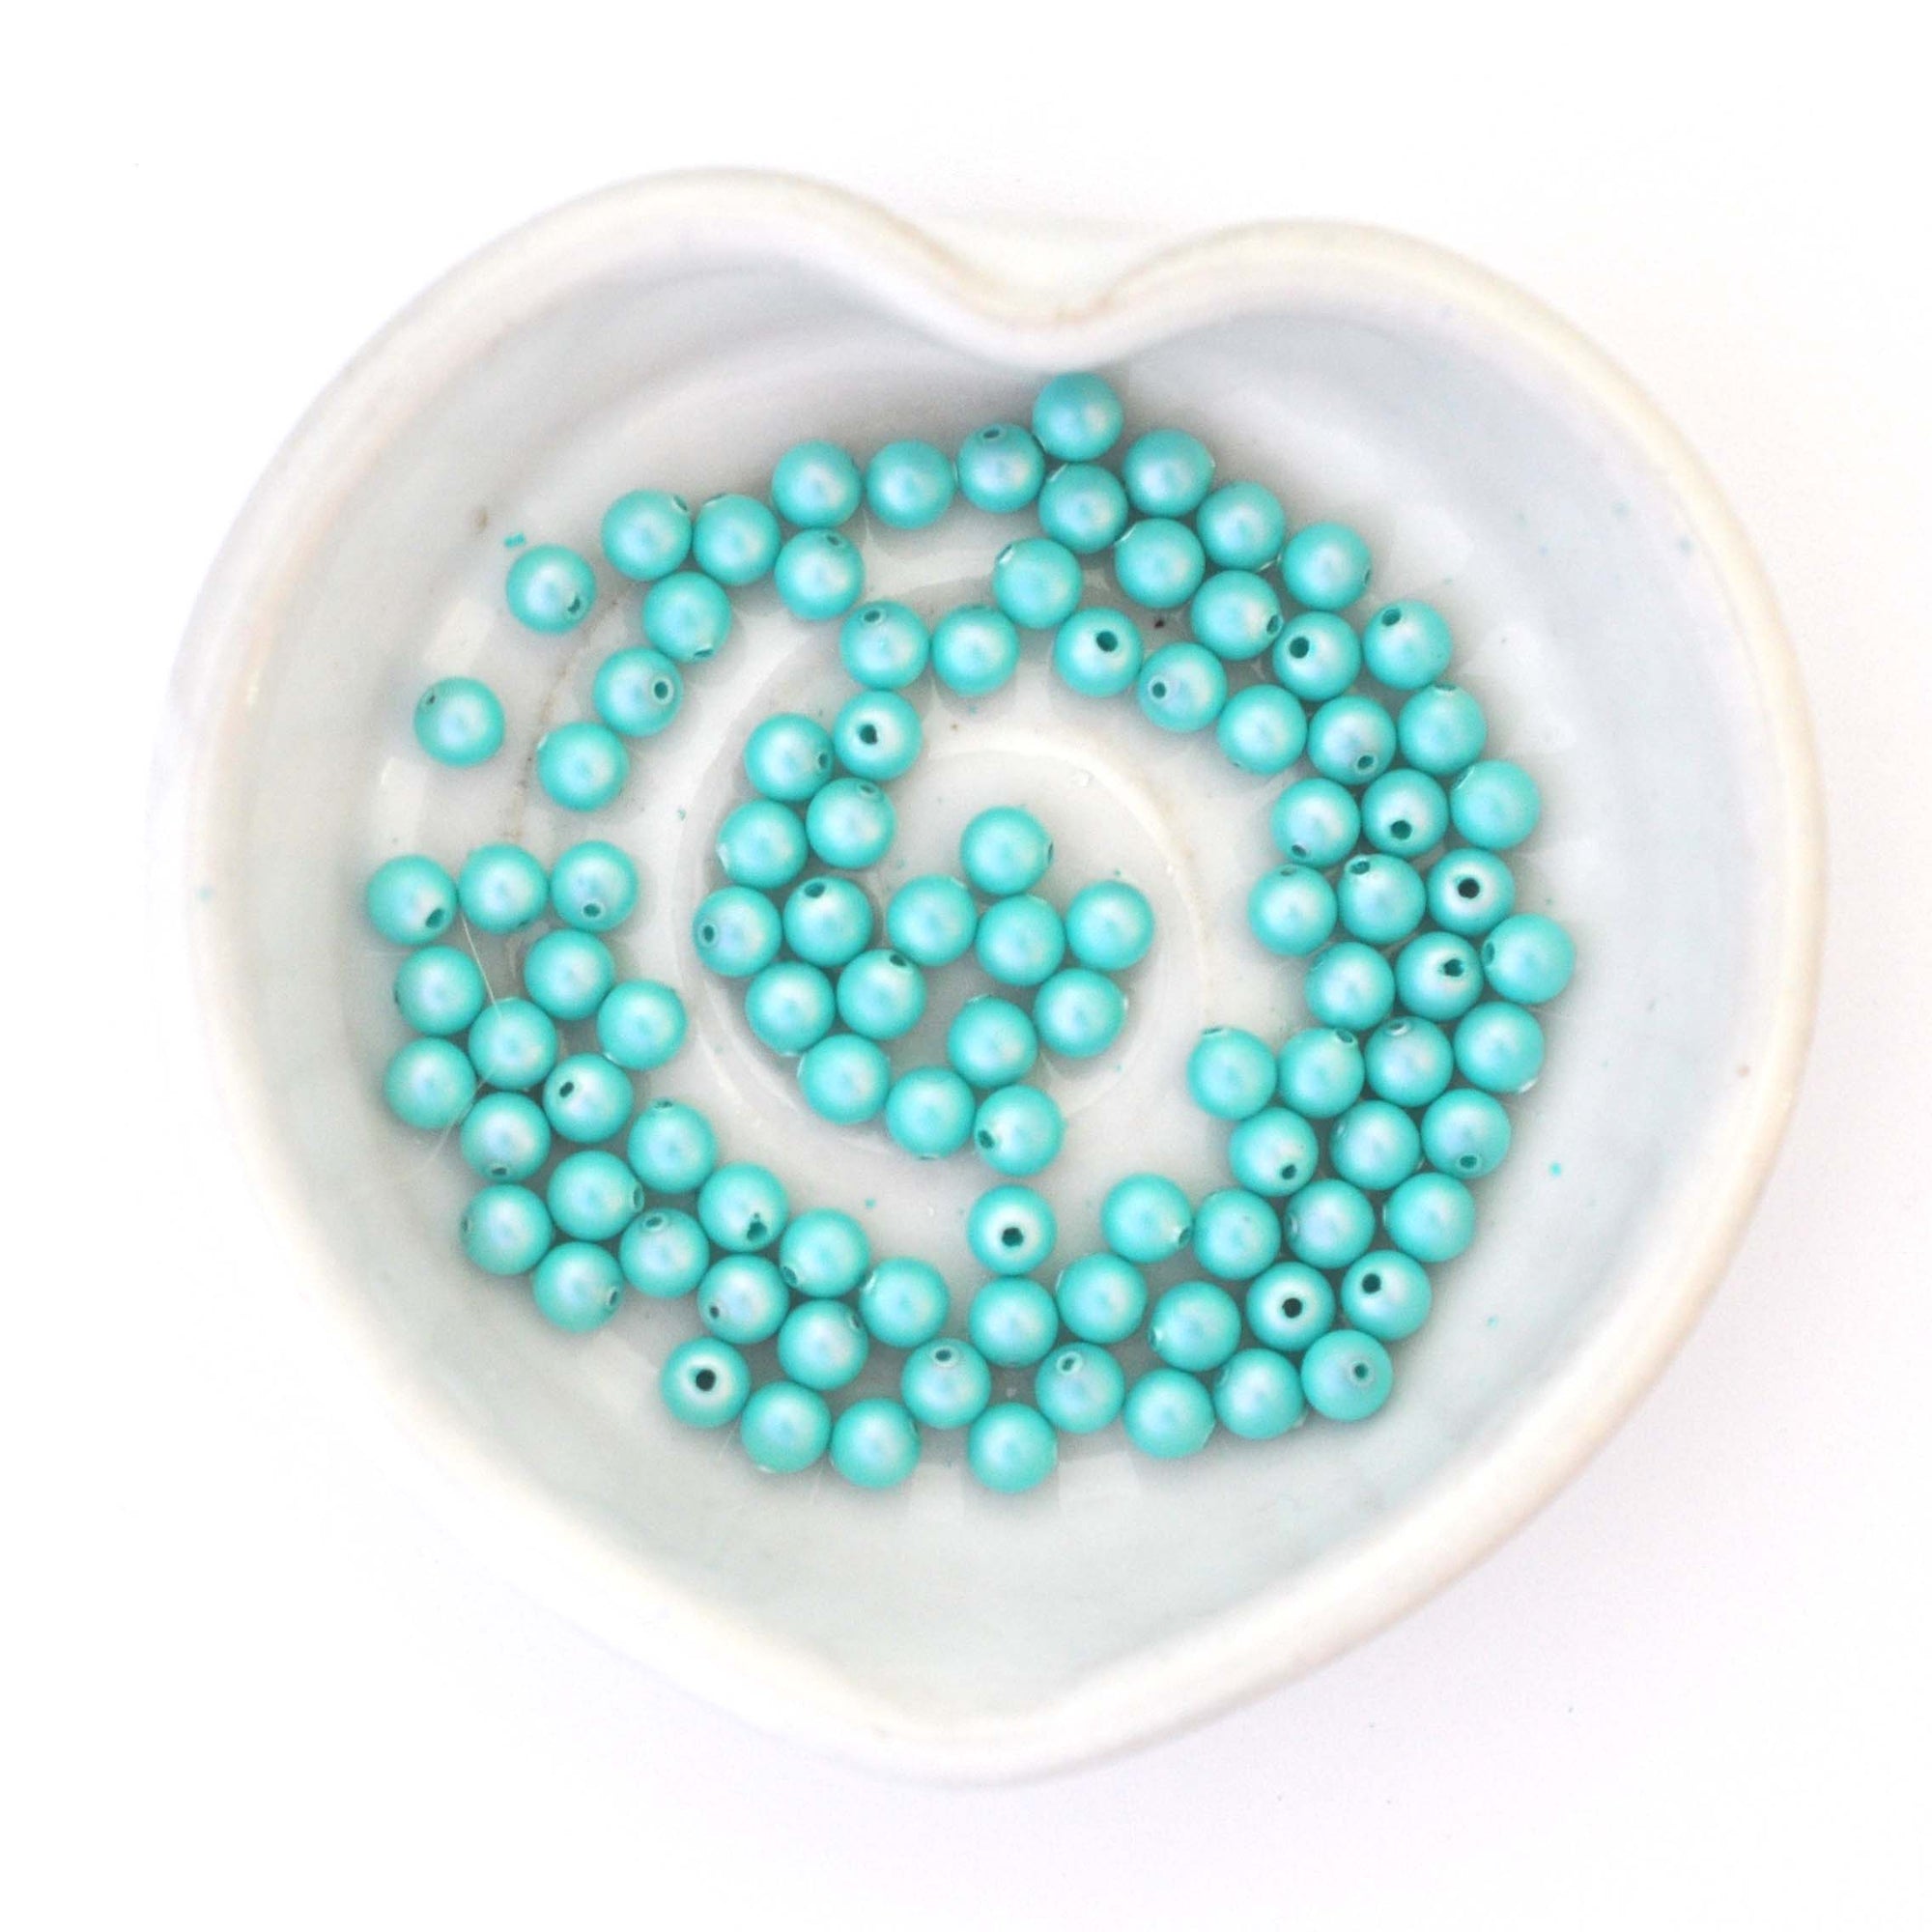 Iridescent Light Turquoise 5810 Barton Crystal Round Pearl Beads 4mm